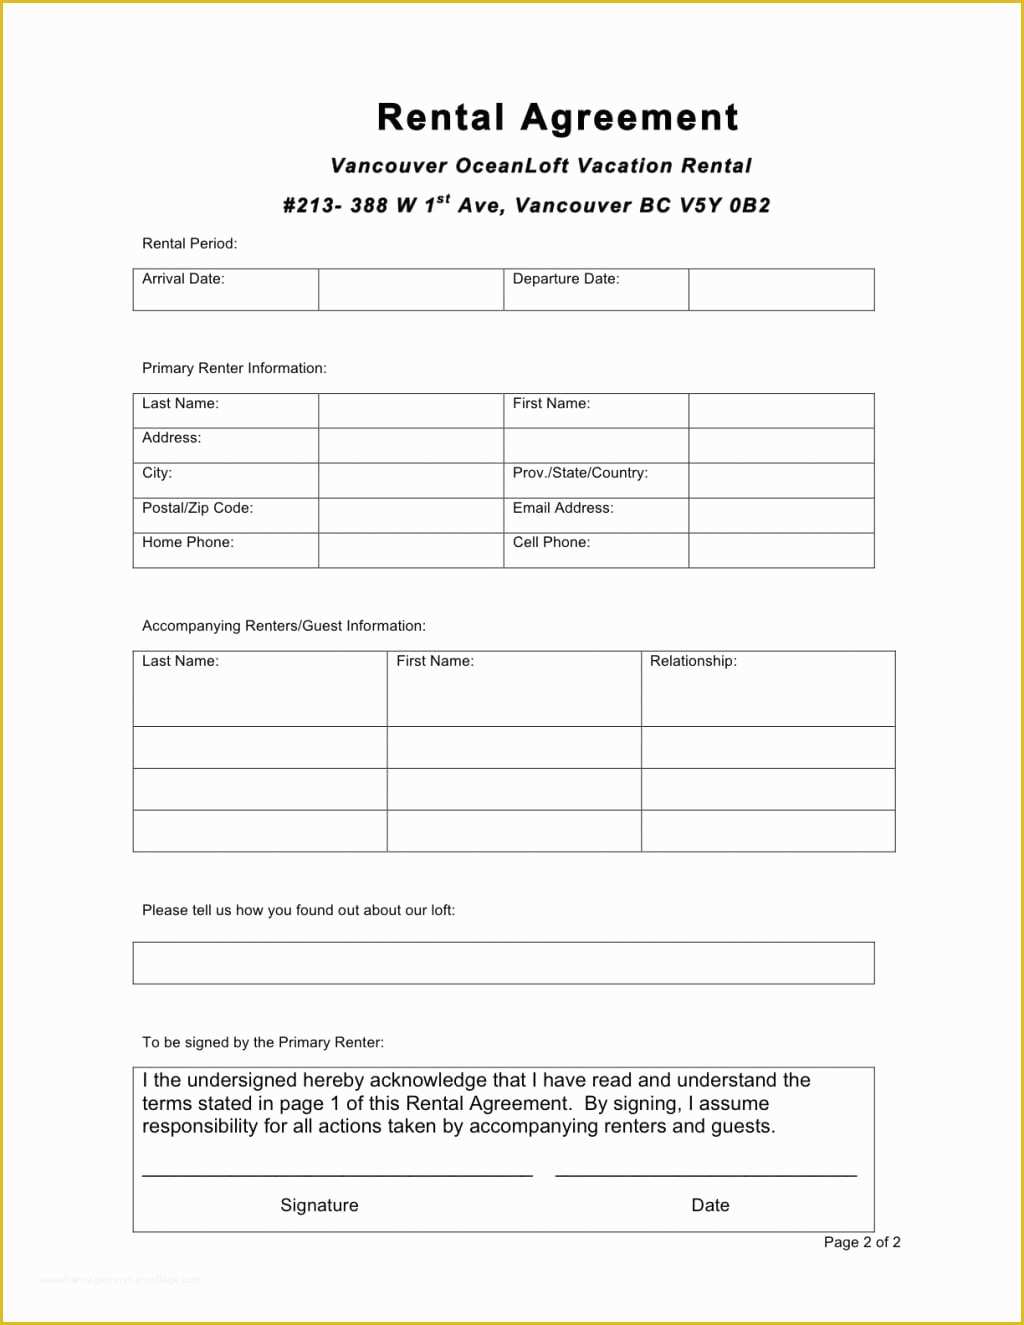 Tenancy Agreement form Template Free Of 6 Free Rental Agreement Templates Excel Pdf formats